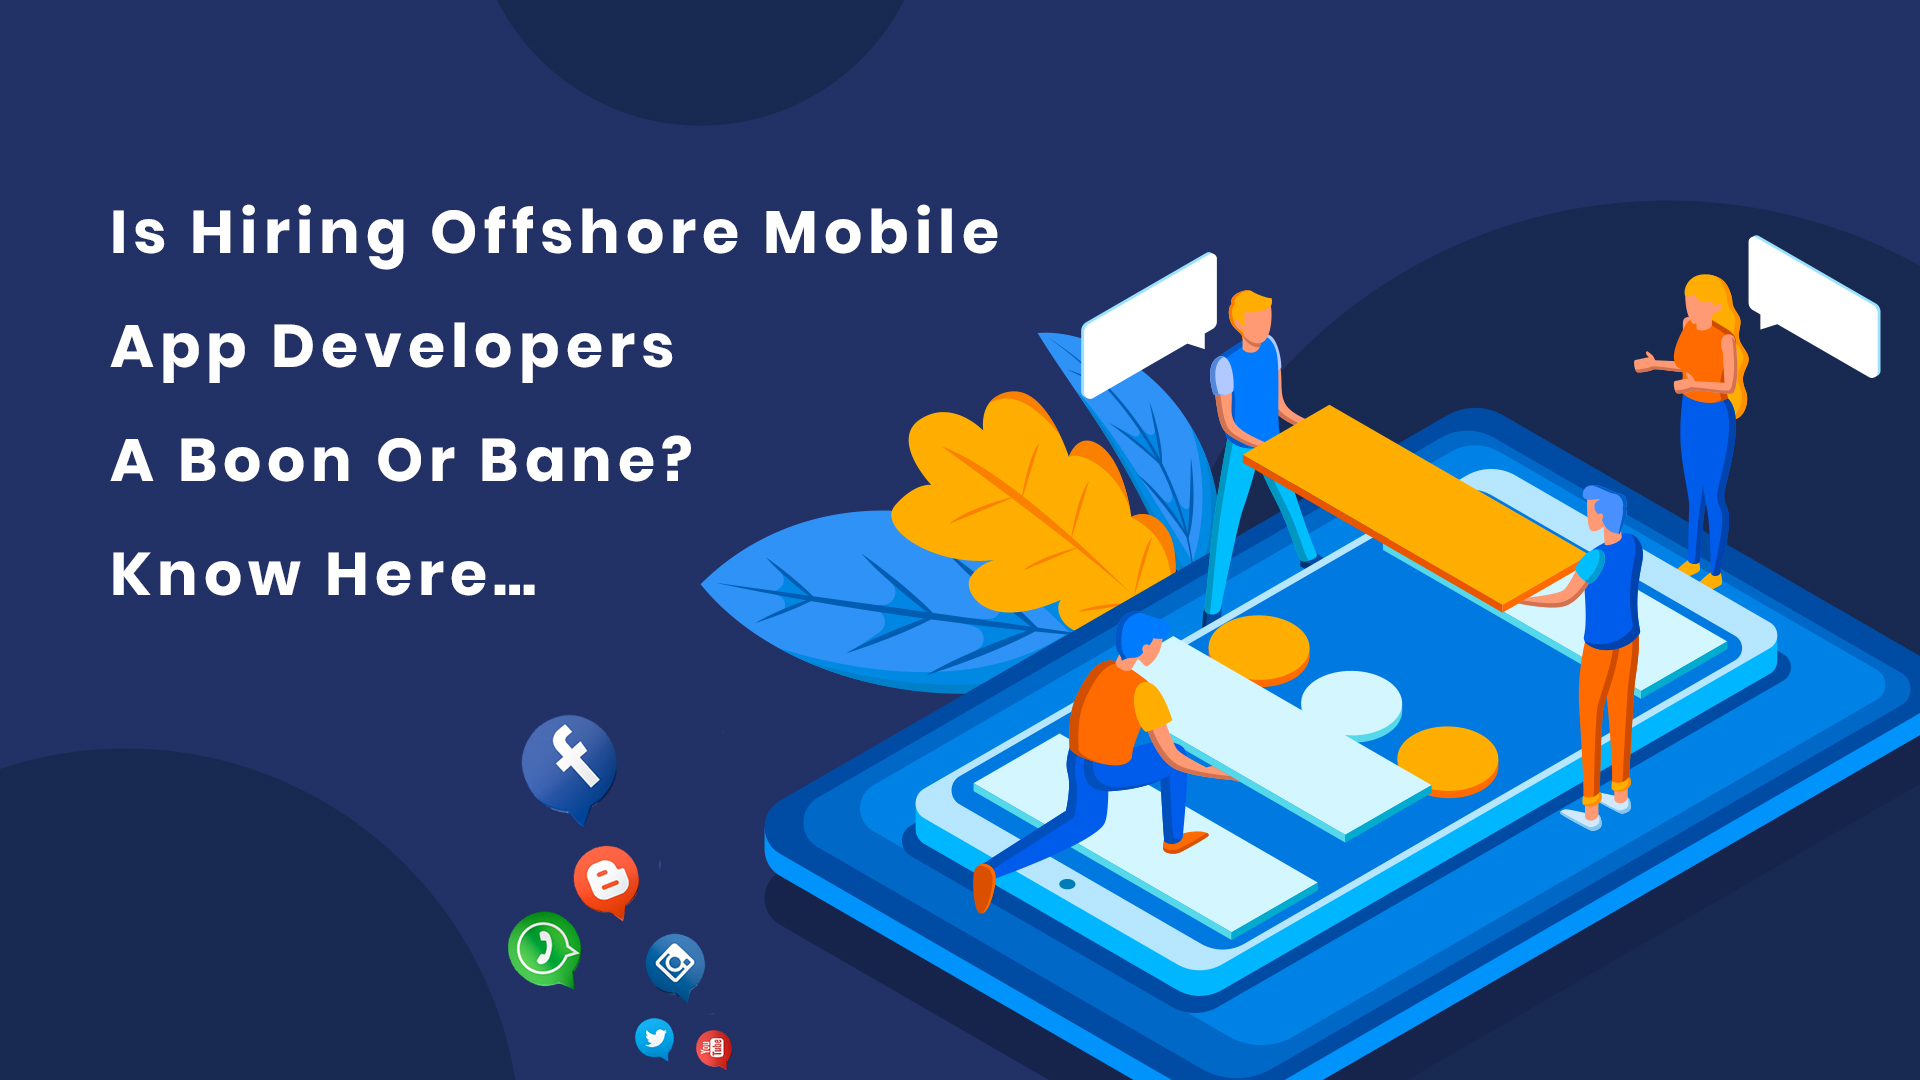 Is Hiring Offshore Mobile App Developers A Boon Or Bane